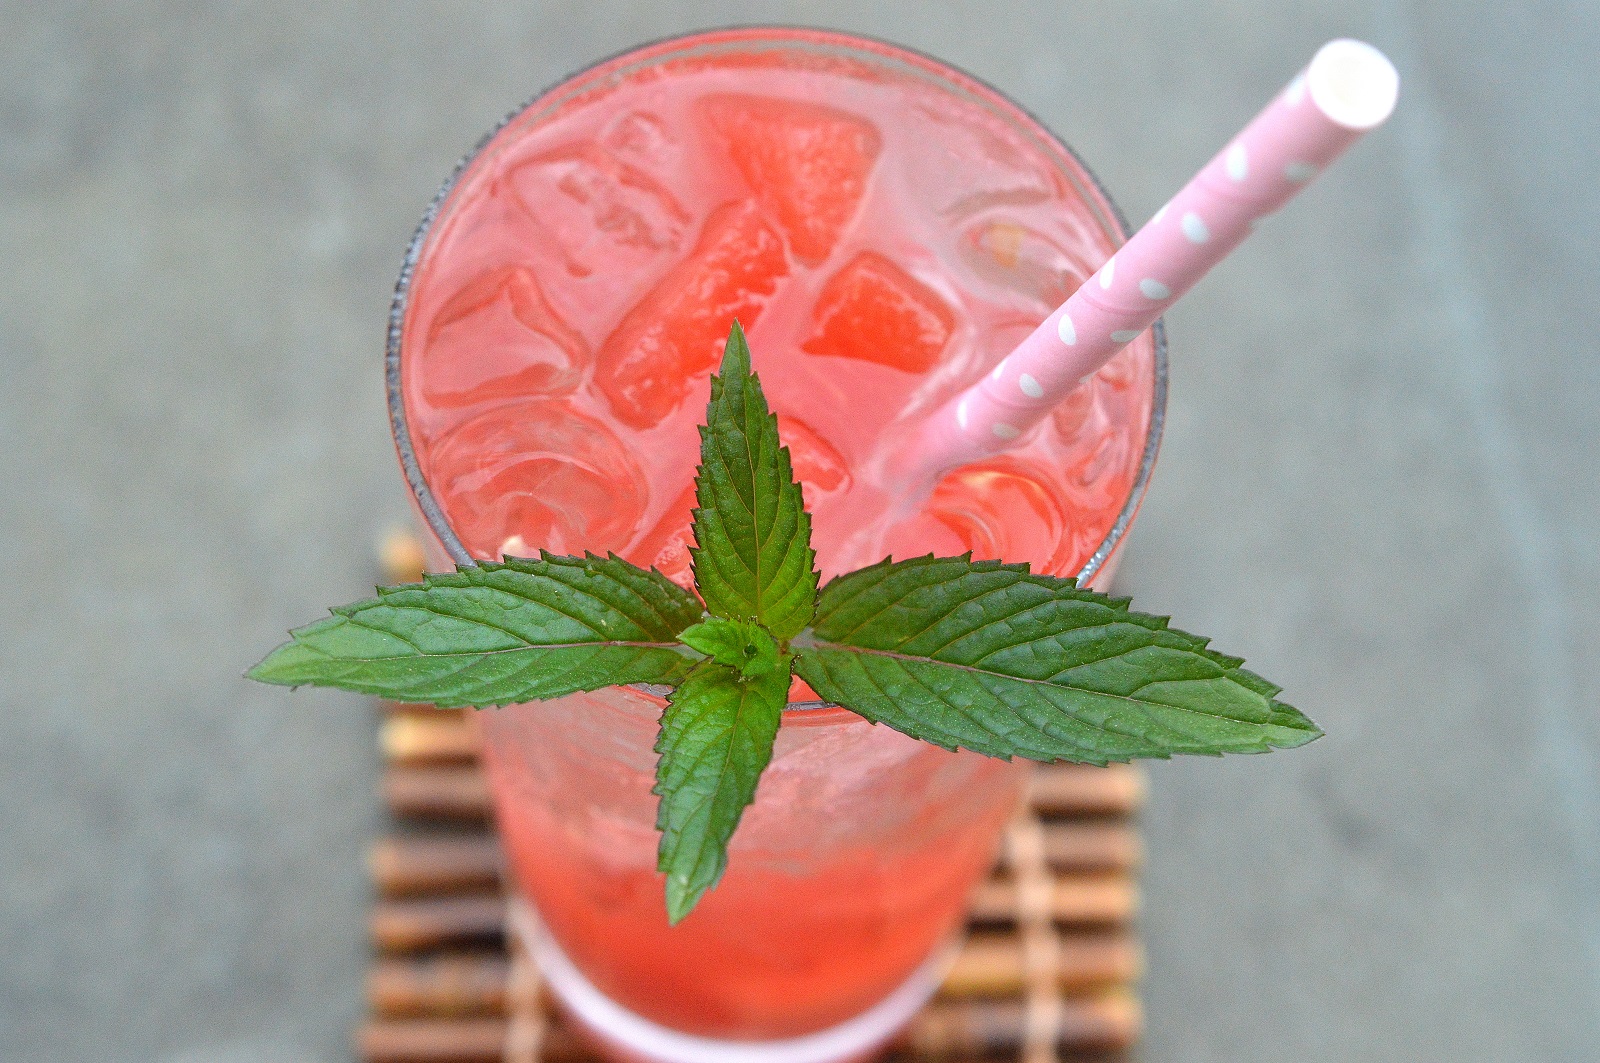 This delicious & refreshing Watermelon Vodka Cooler is the perfect summer sip!